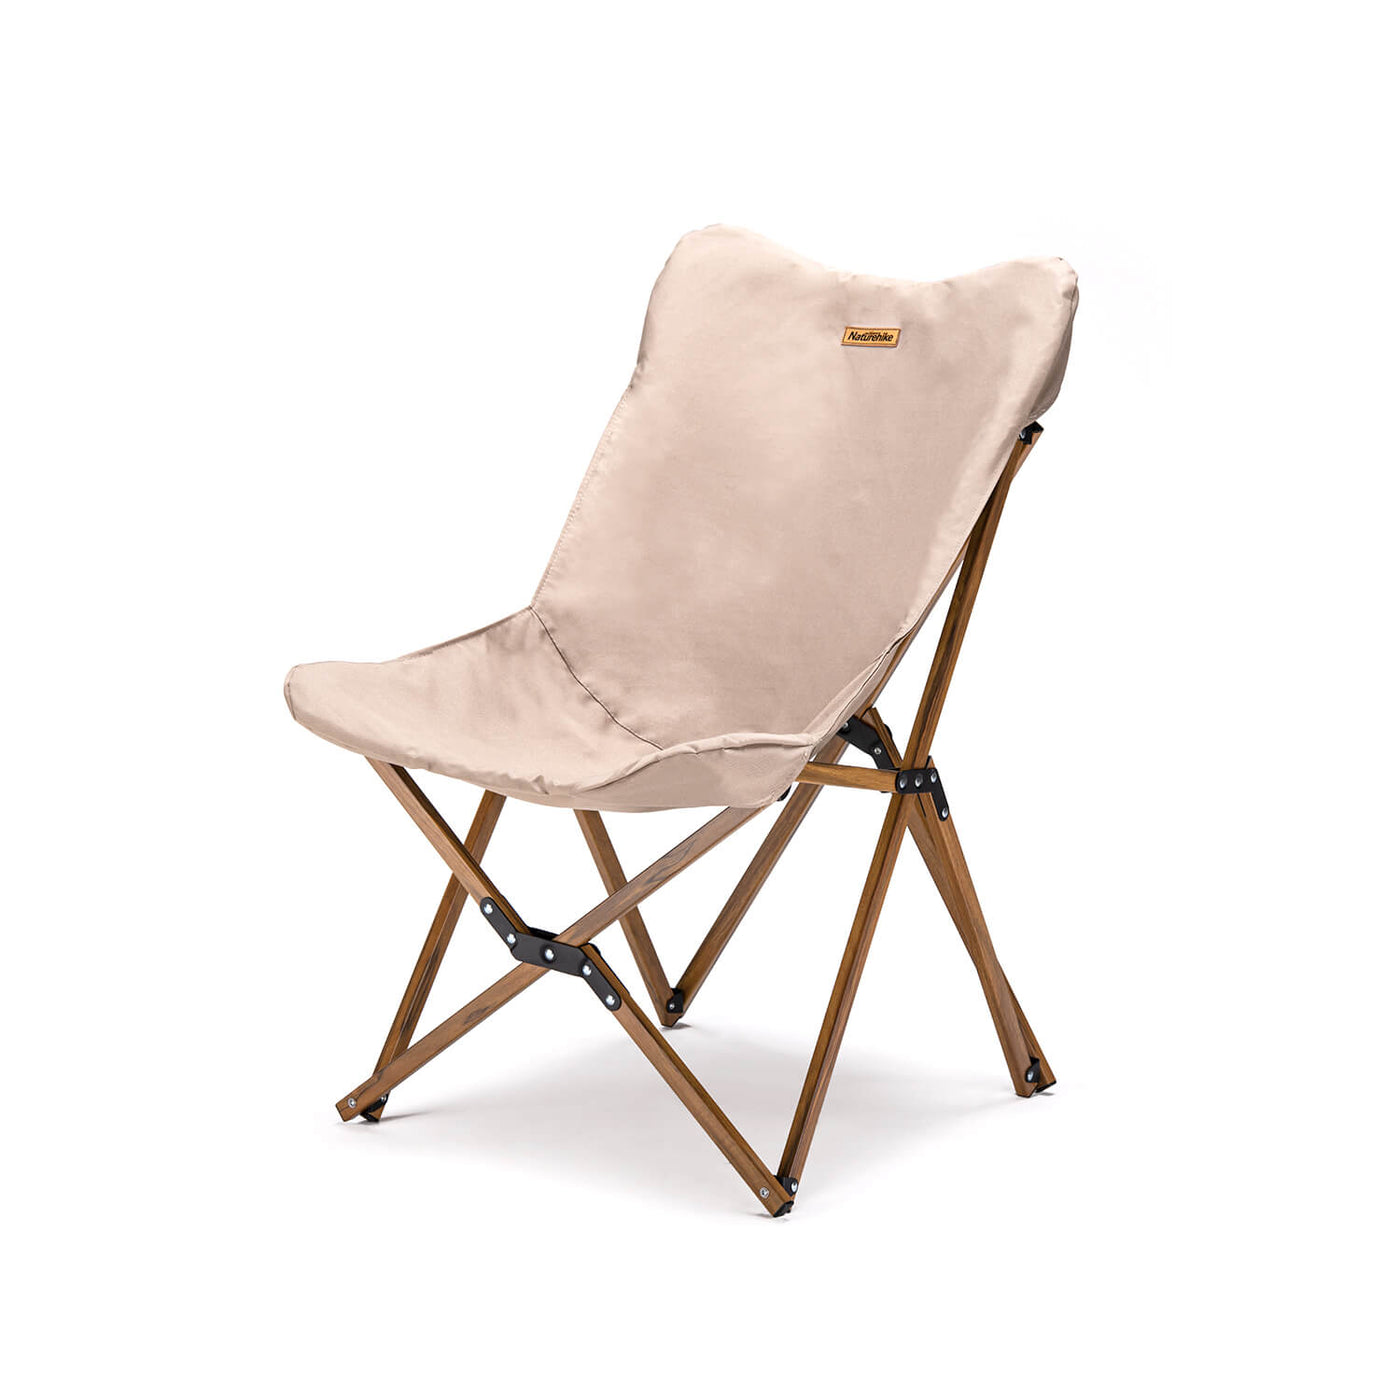 Compact outdoor folding chair